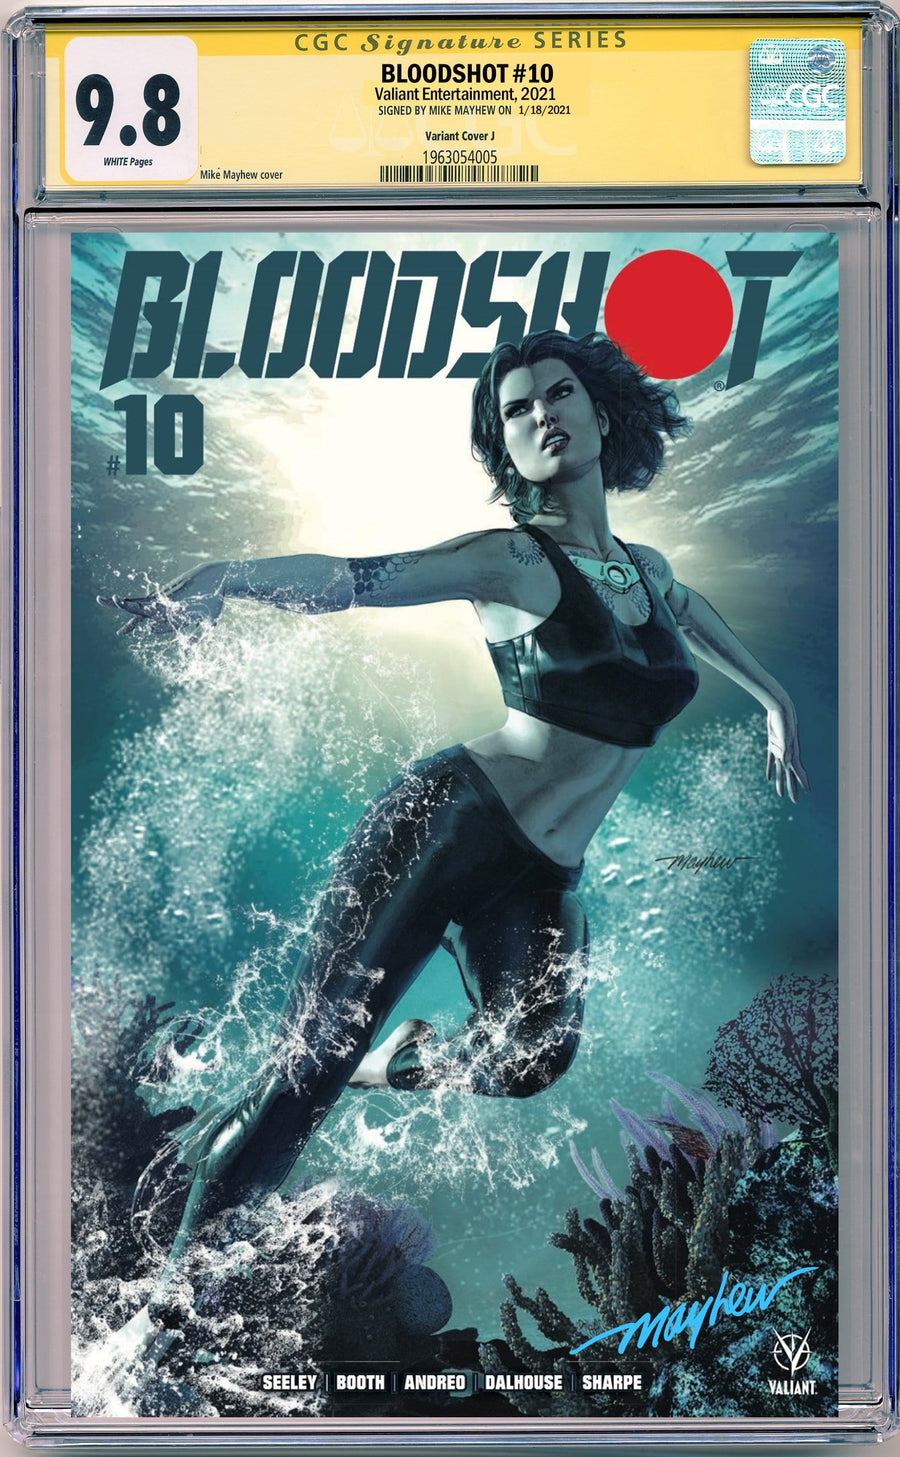 BLOODSHOT #10 MIKE MAYHEW STUDIO EXCLUSIVE VARIANTS CGC SIG SERIES 9.6 AND ABOVE OPTIONS